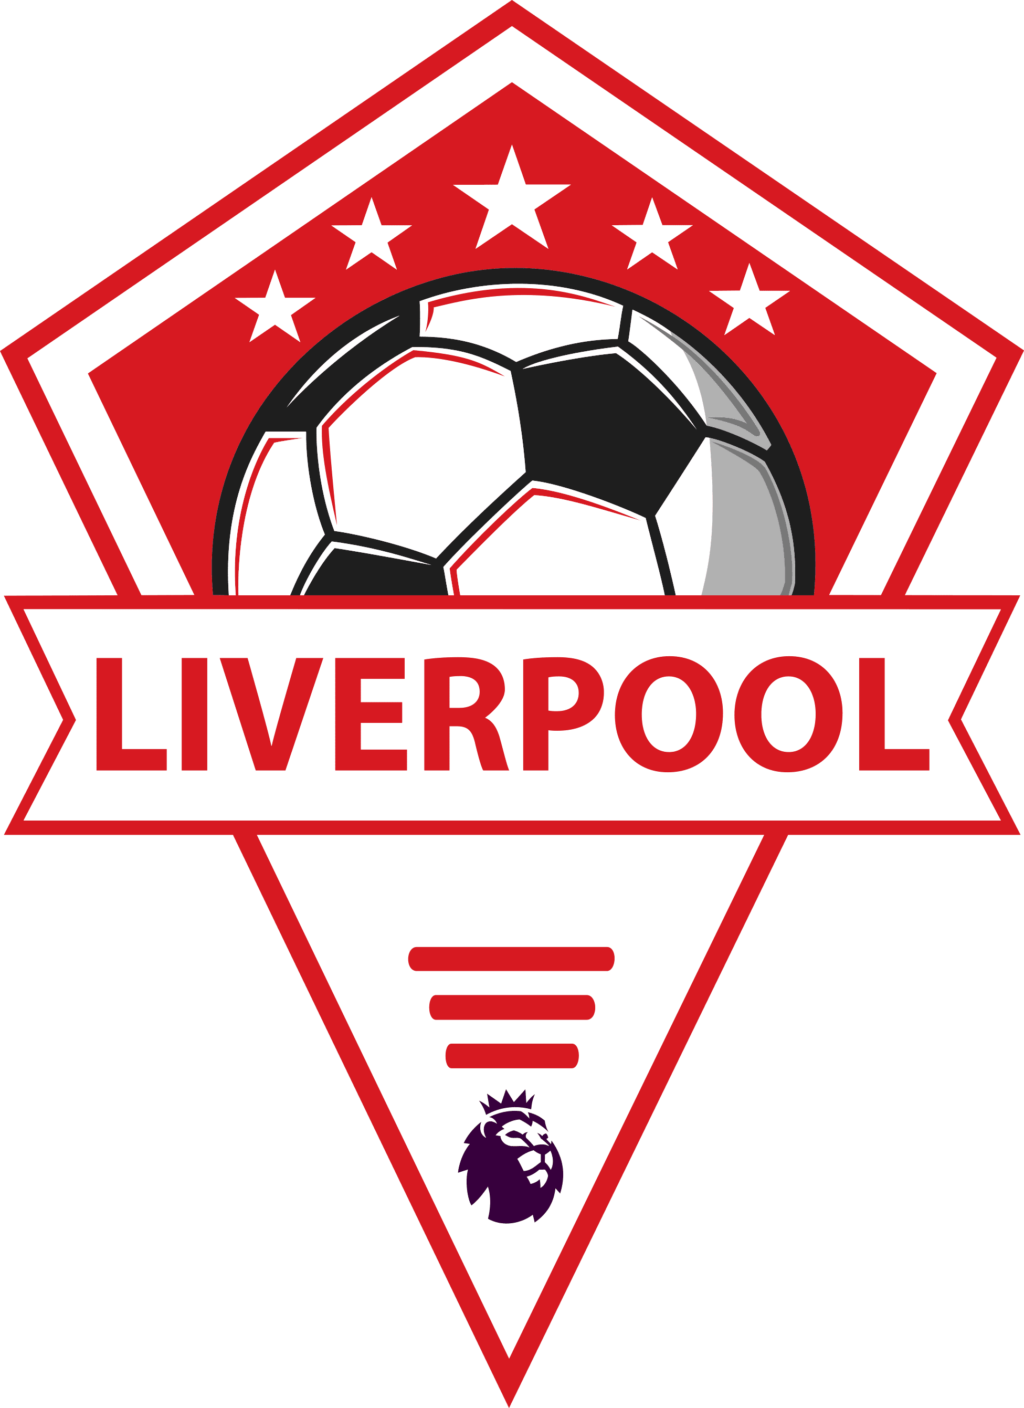 liverpool fc 09 European Football (England Premier League) Liverpool FC SVG, SVG Files For Silhouette, Liverpool FC Files For Cricut, Liverpool FC SVG, DXF, EPS, PNG Instant Download. Liverpool FC SVG, SVG Files For Silhouette, Liverpool FC Files For Cricut, Liverpool FC SVG, DXF, EPS, PNG Instant Download.